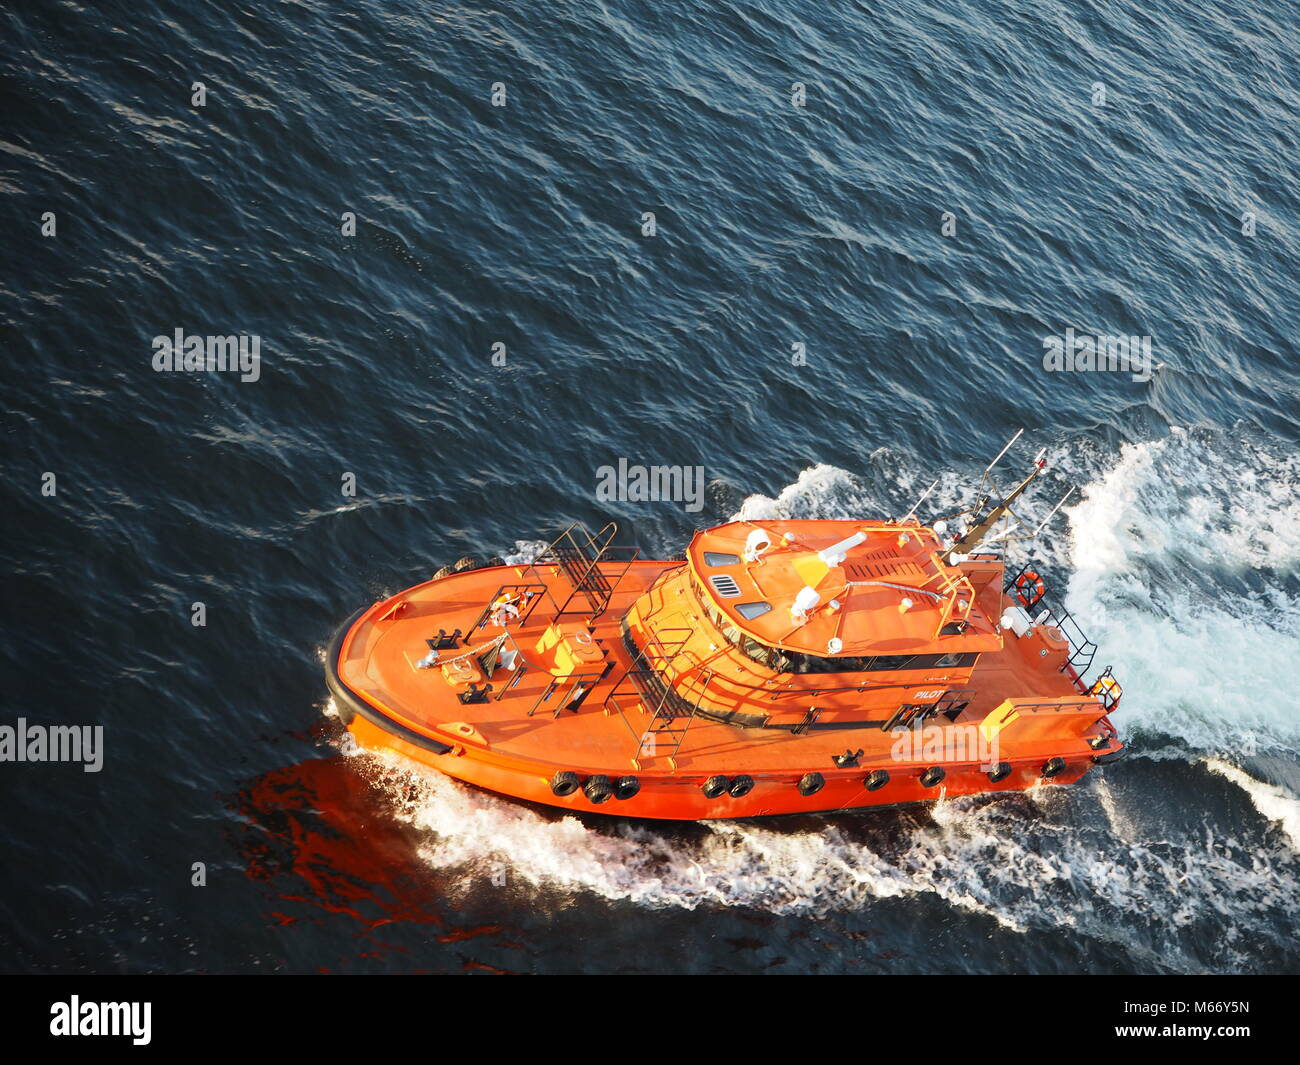 Colorful safety boat leading the huge cruise ship put of the harbor in Stockholm, Sweden. Bright orange boat speeding in the wide, blue ocean. Stock Photo